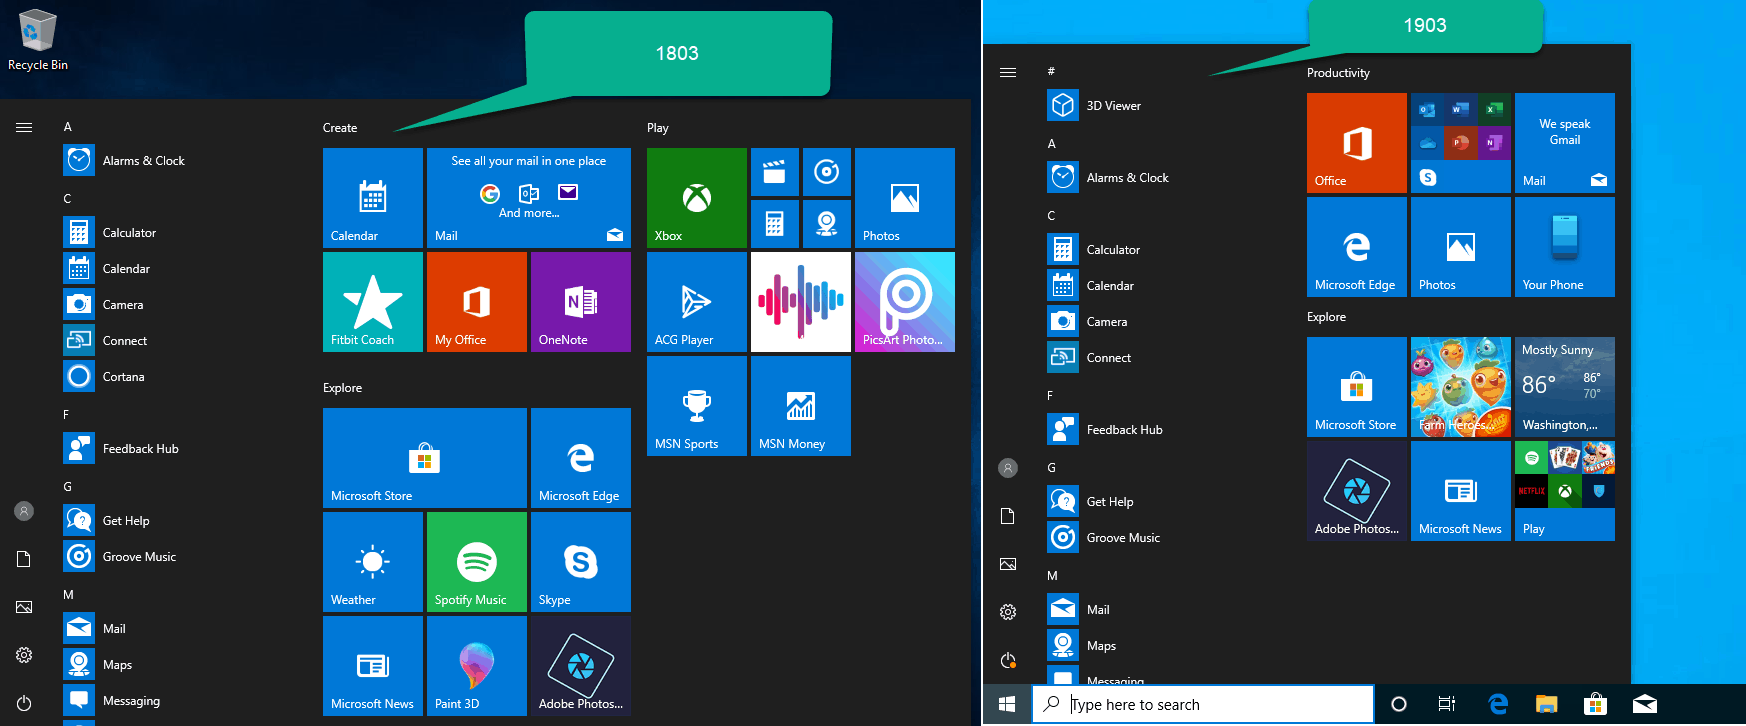 Updates And Changes To The Start Menu With Windows 10 V1903 And V1909 And  How To Manage It Like A Boss - Policypak